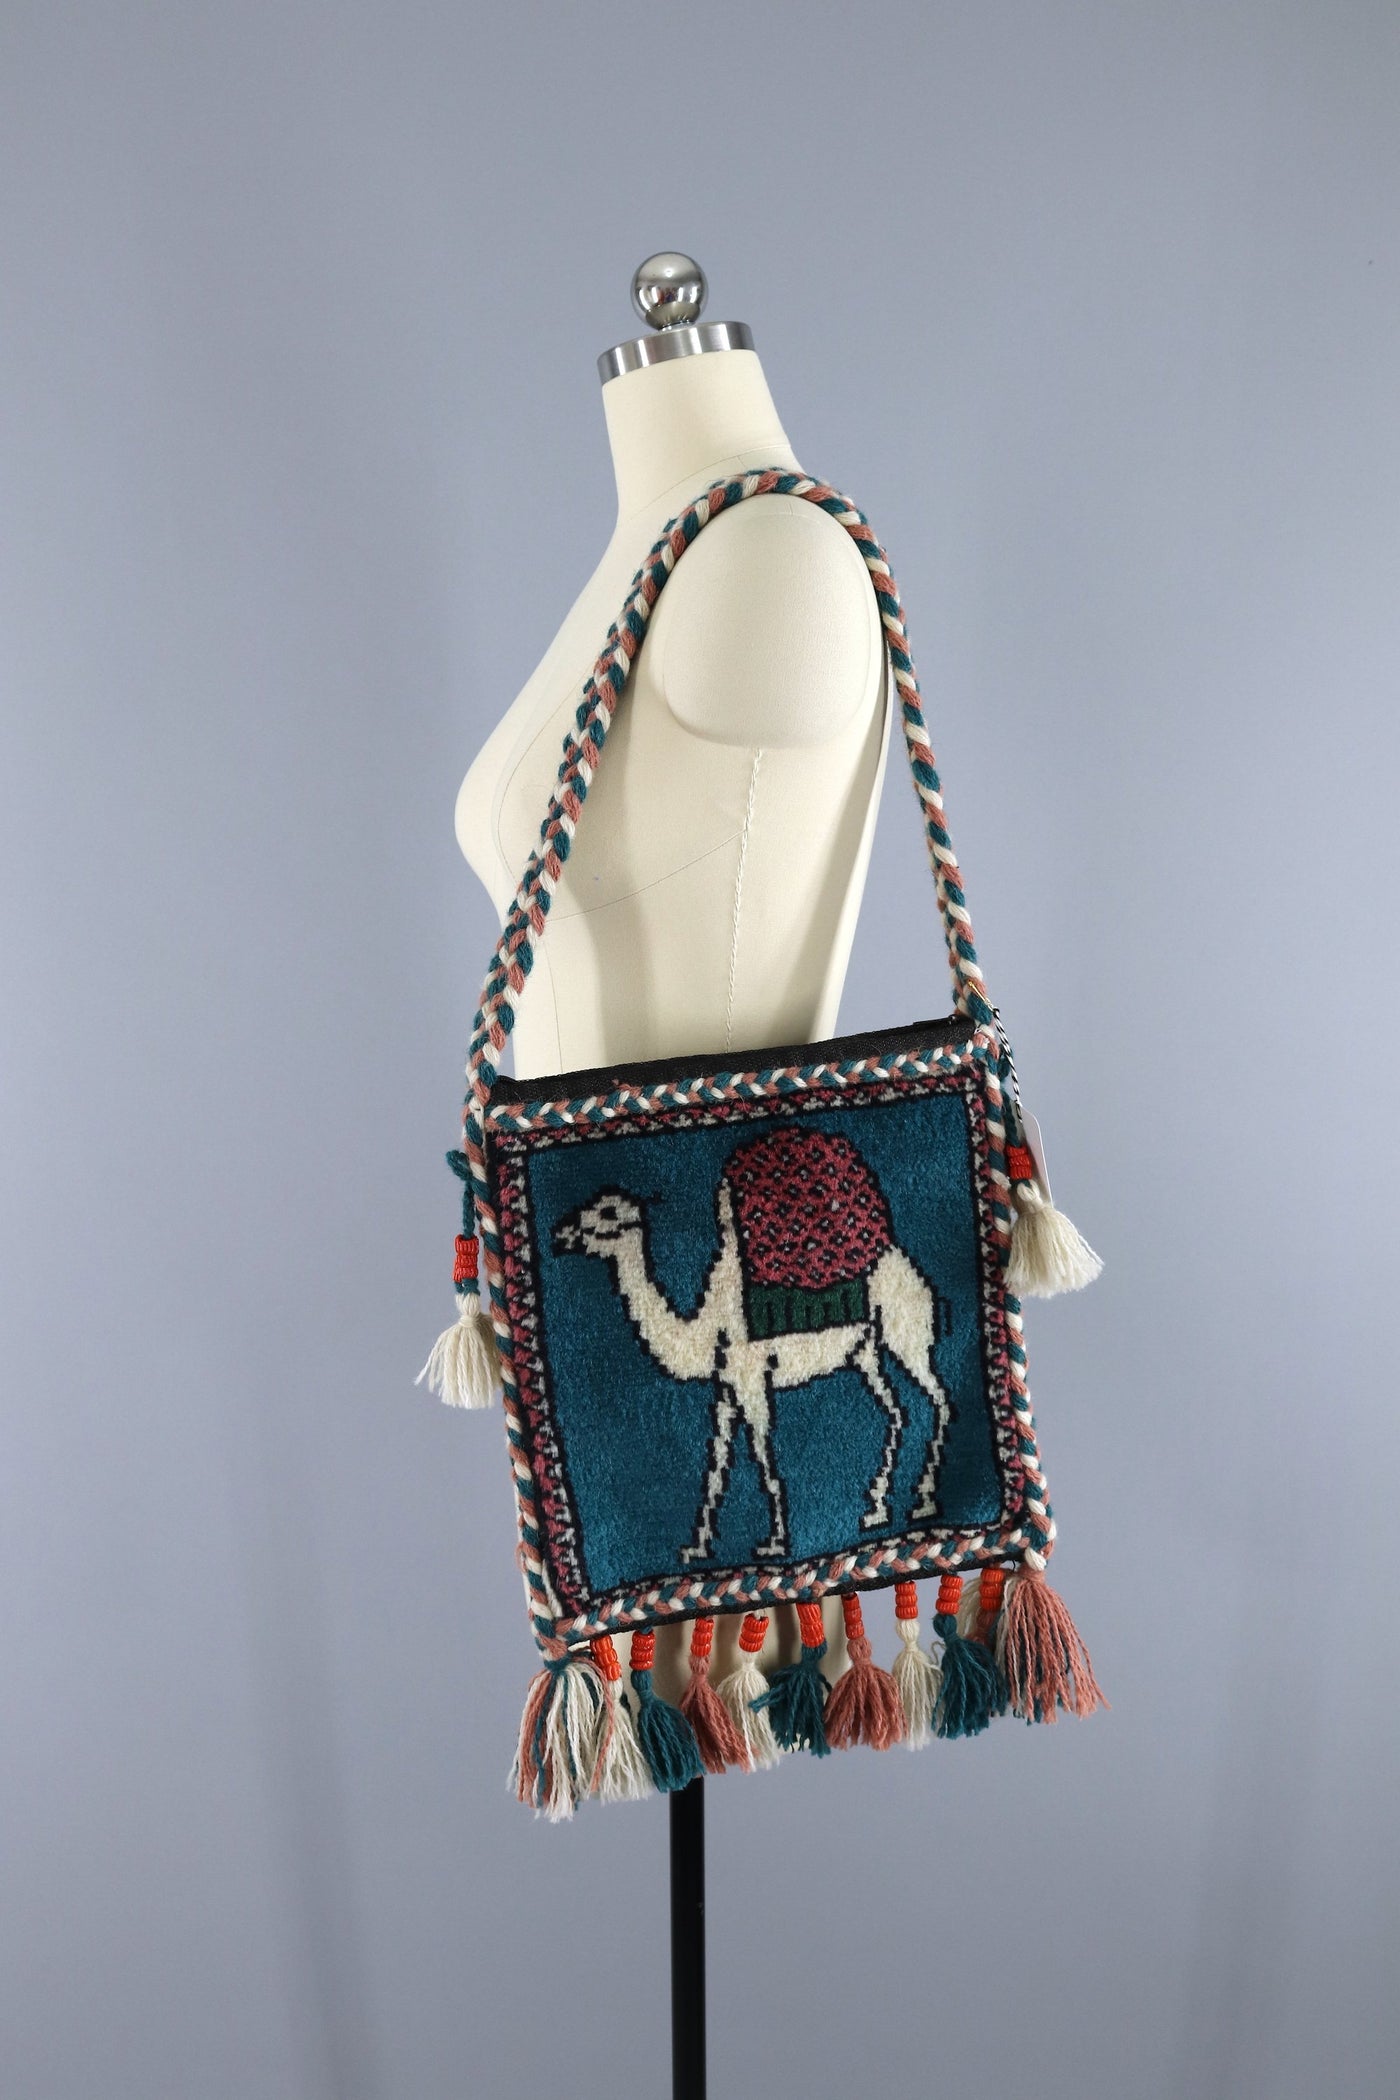 Vintage 1970s - 1980s Egyptian CAMEL Carpet Bag with Beaded Tassels - ThisBlueBird